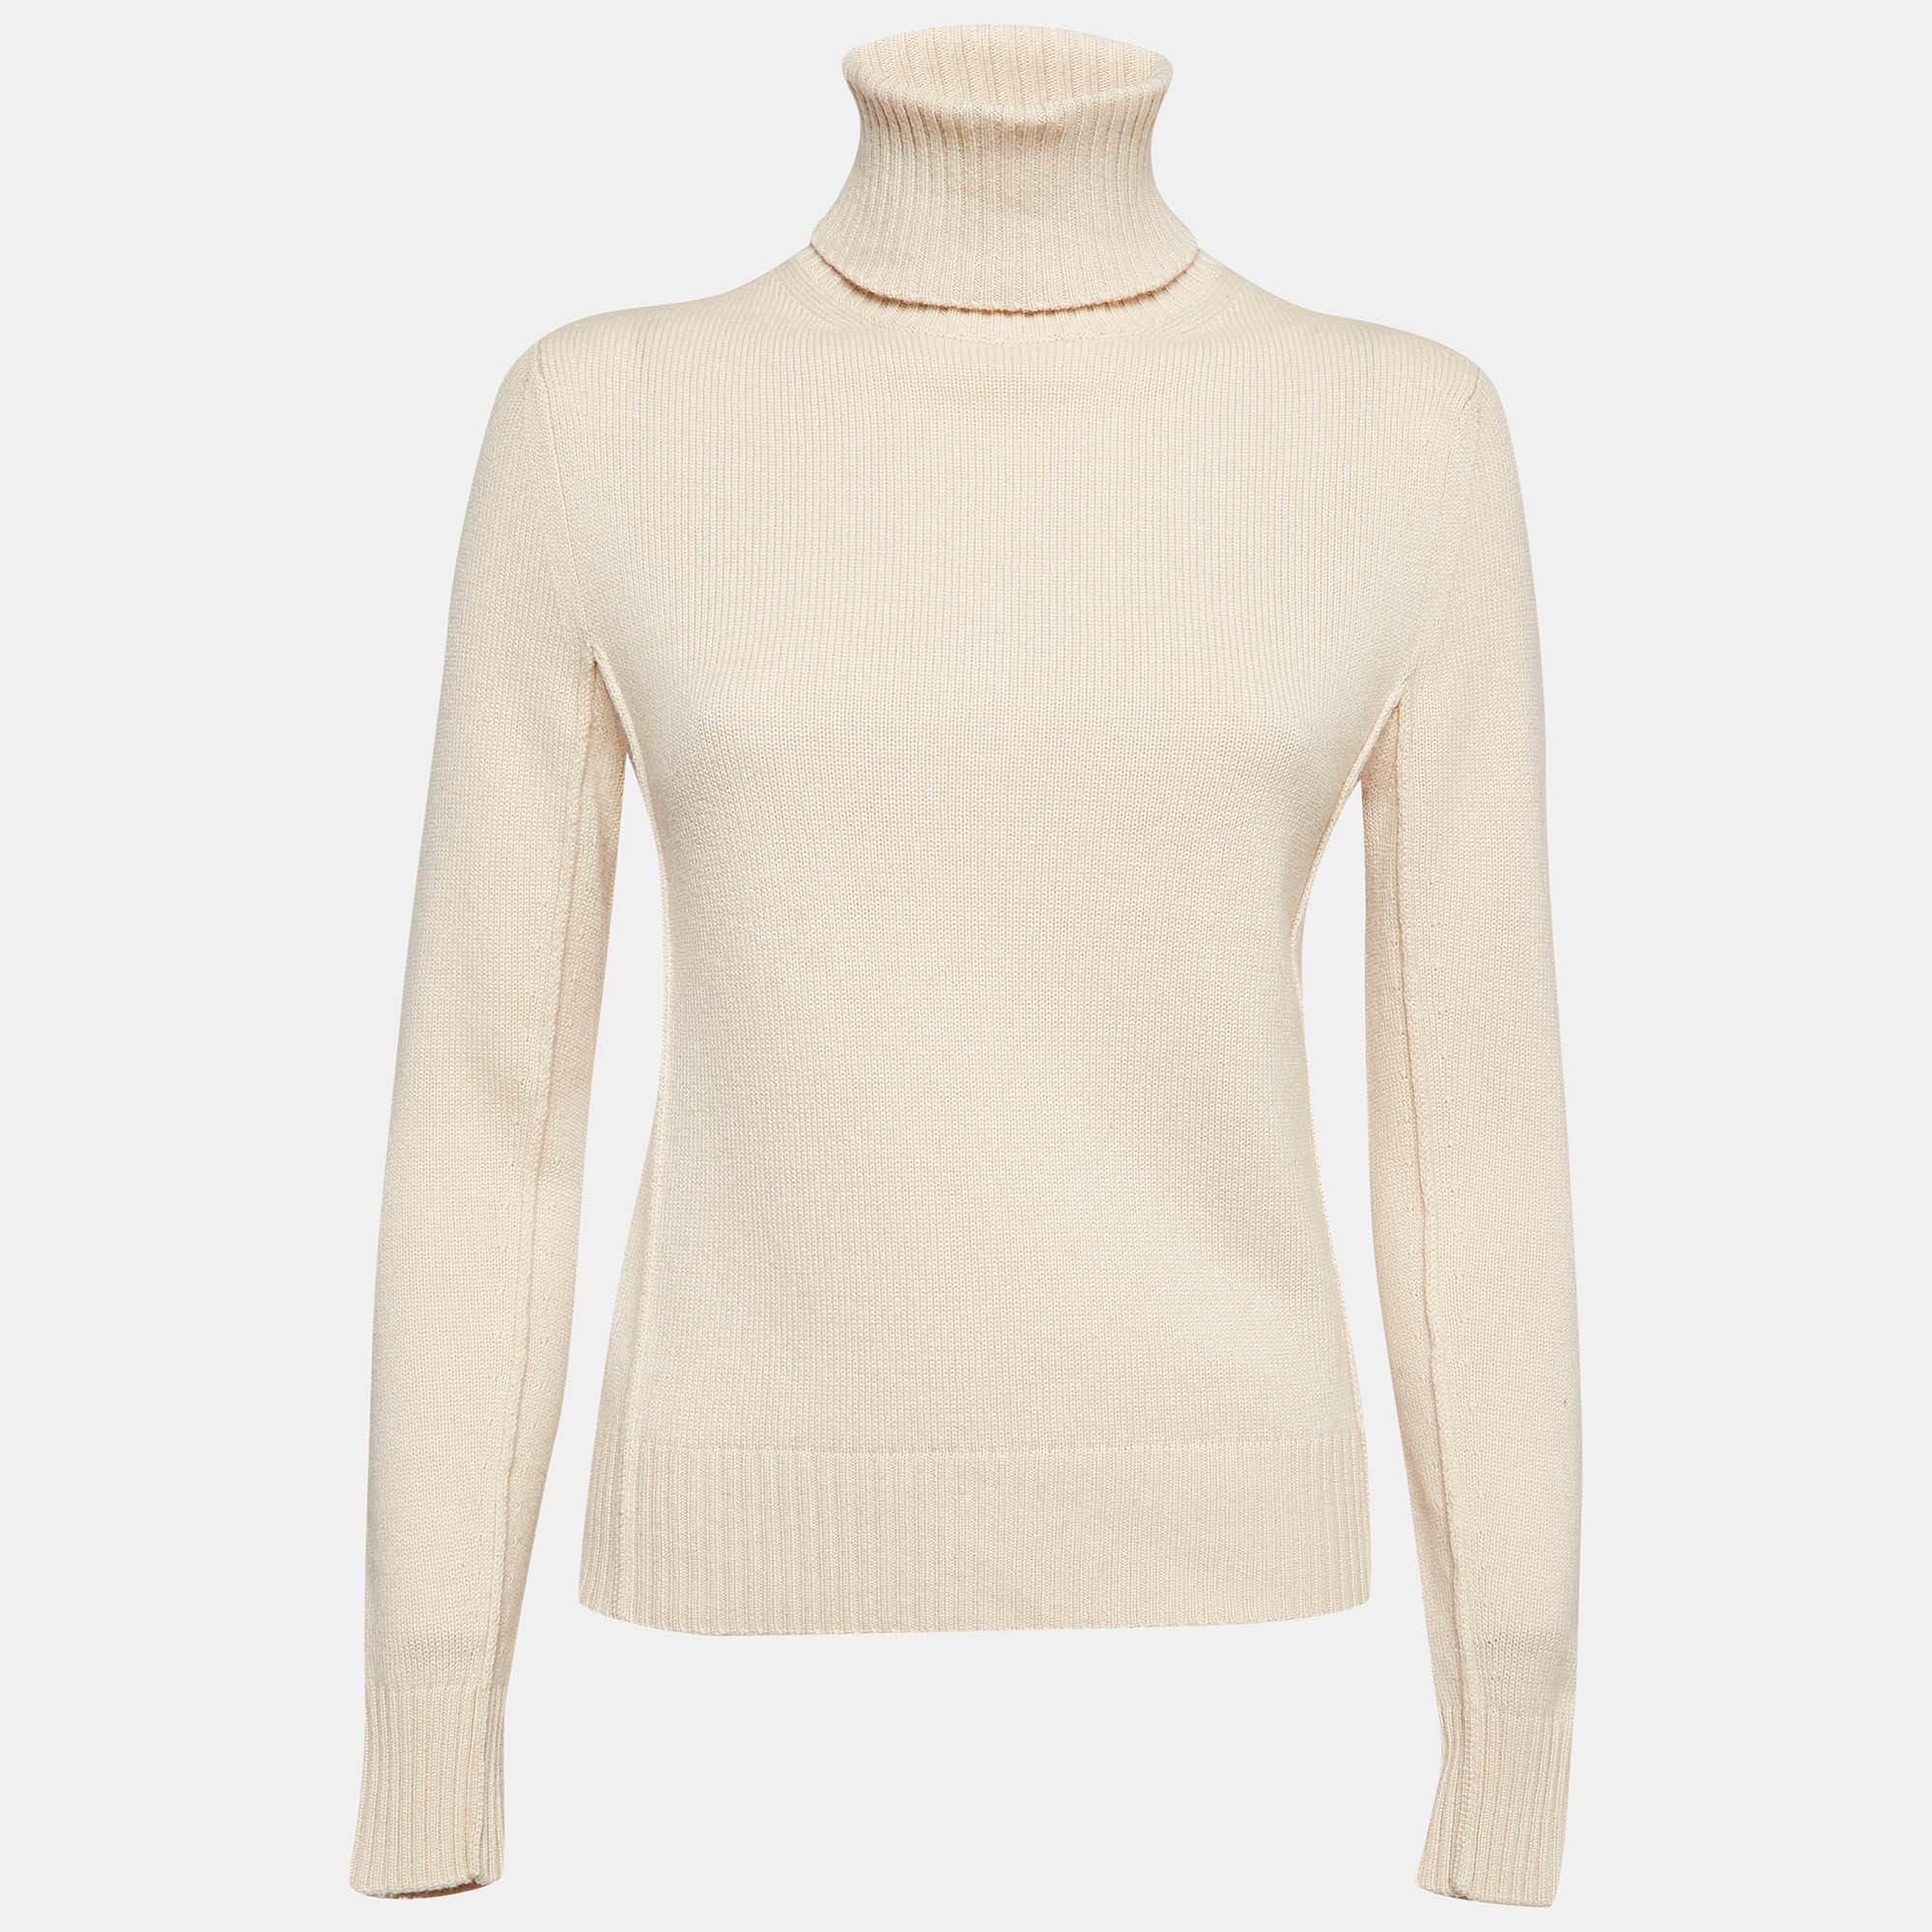 Pre-owned Chloé Cream Cashmere Wool Knit Turtle Neck Sweater Xs